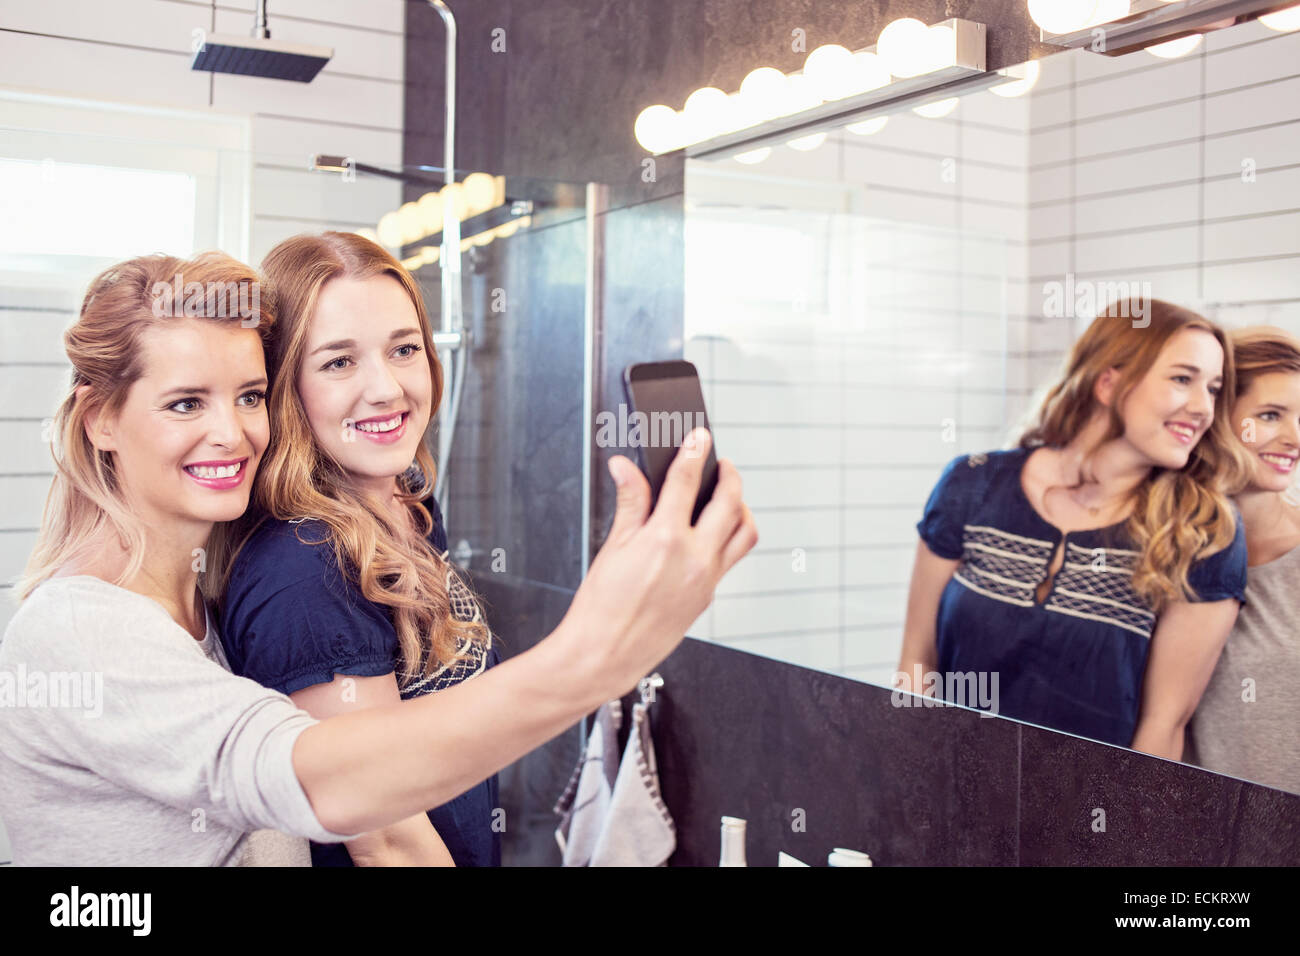 Happy female friends taking self-portrait with cell phone in bathroom Stock Photo